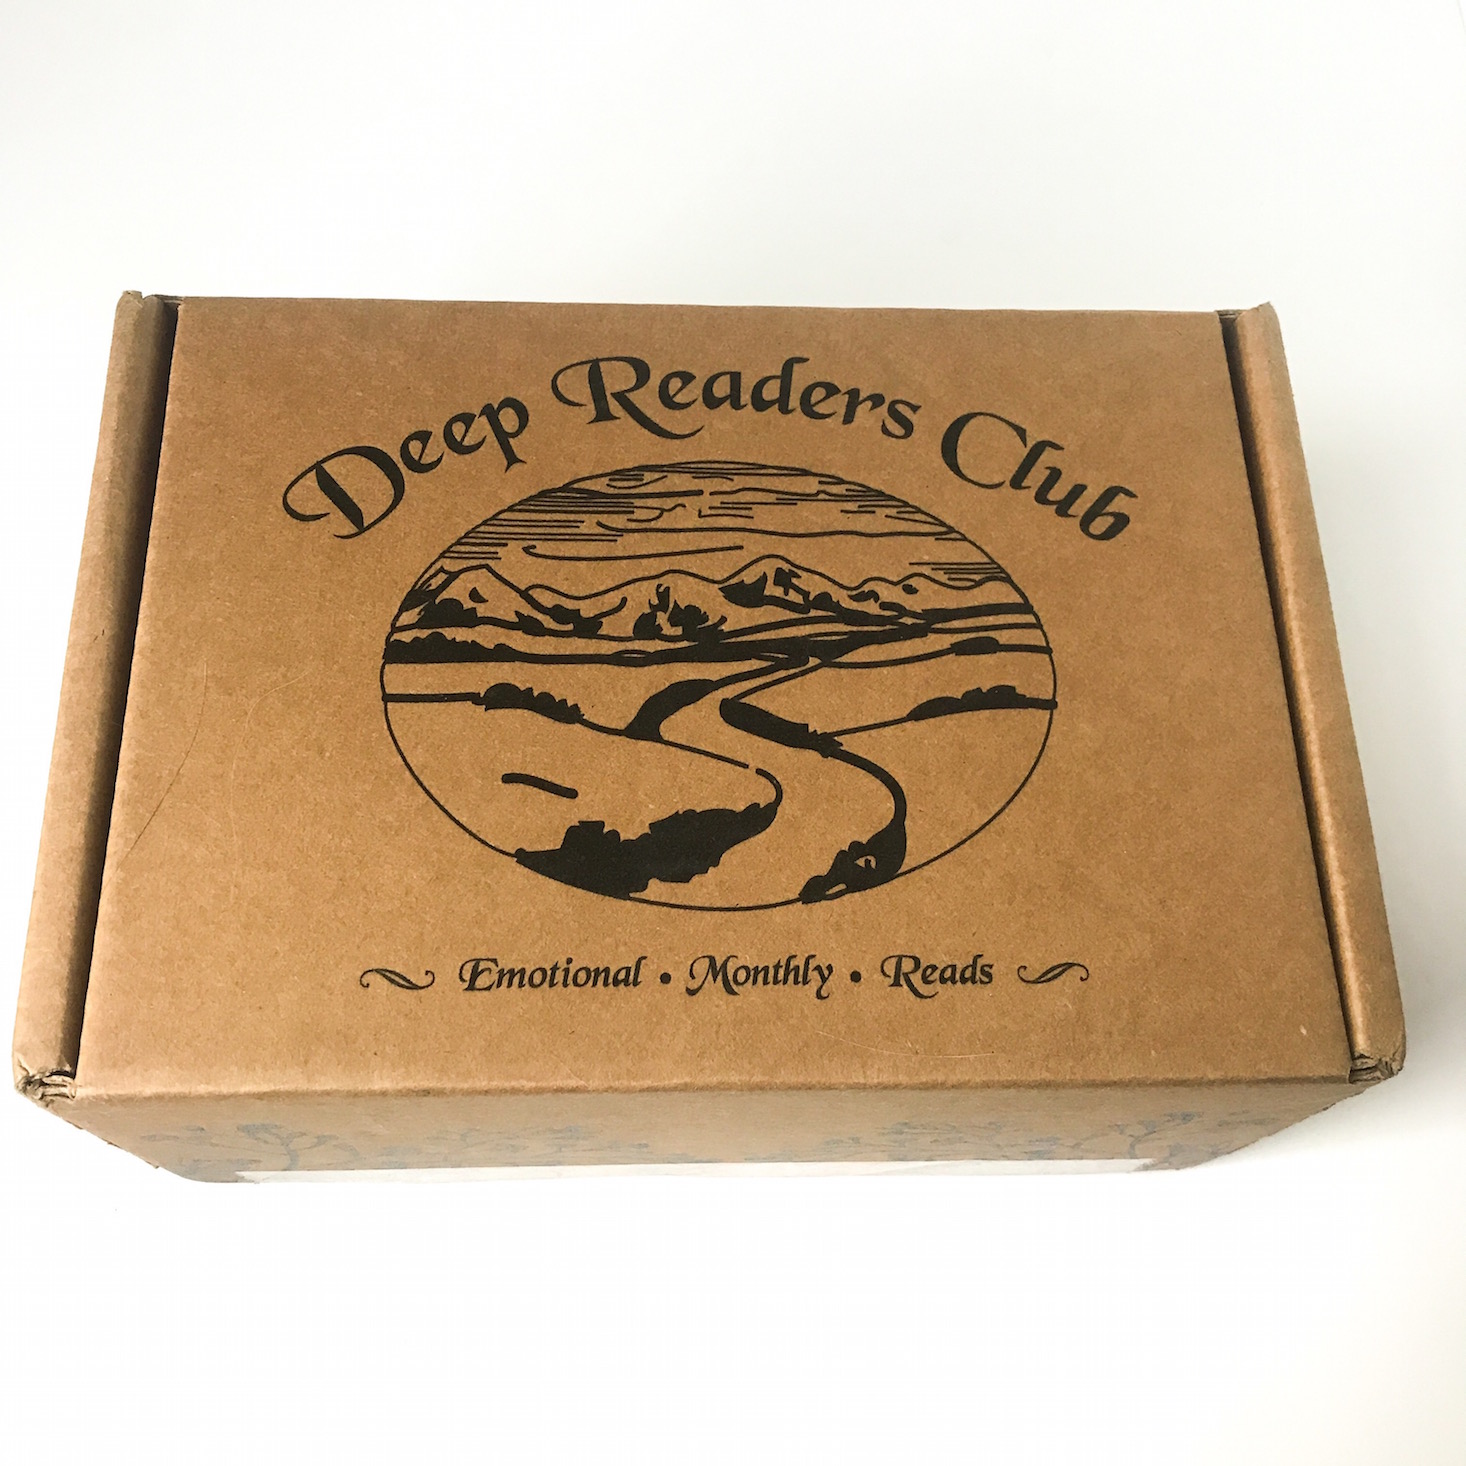 Deep Readers Club Book Subscription Review + Coupon – June 2018